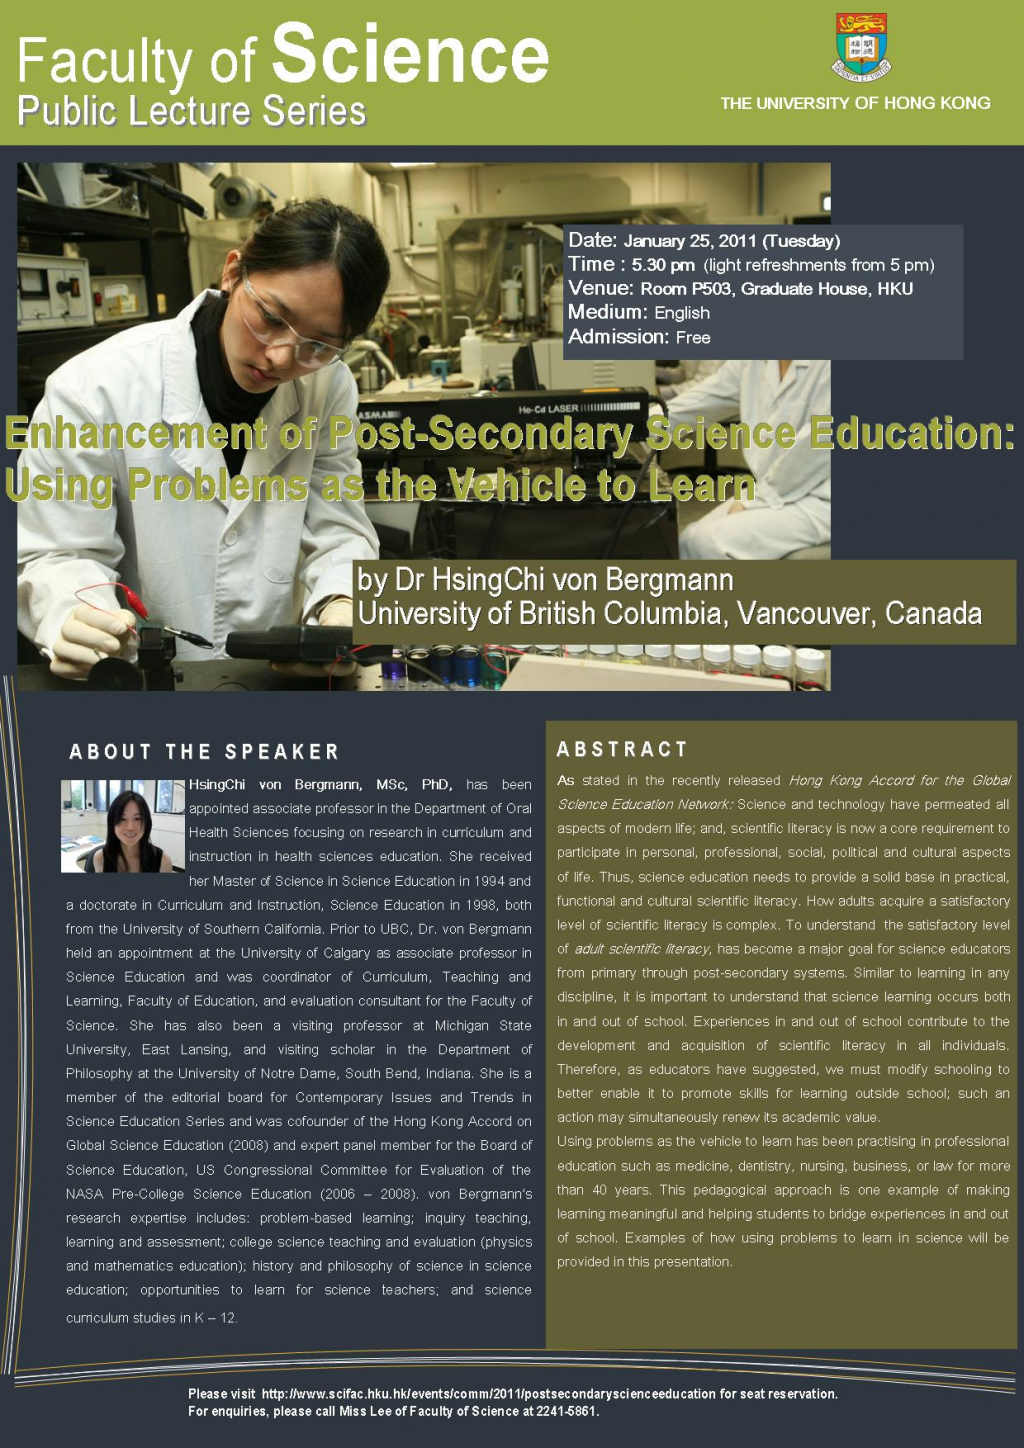 Public Lecture: Enhancement of Post-Secondary Science Education: Using Problems as the Vehicle to Learn